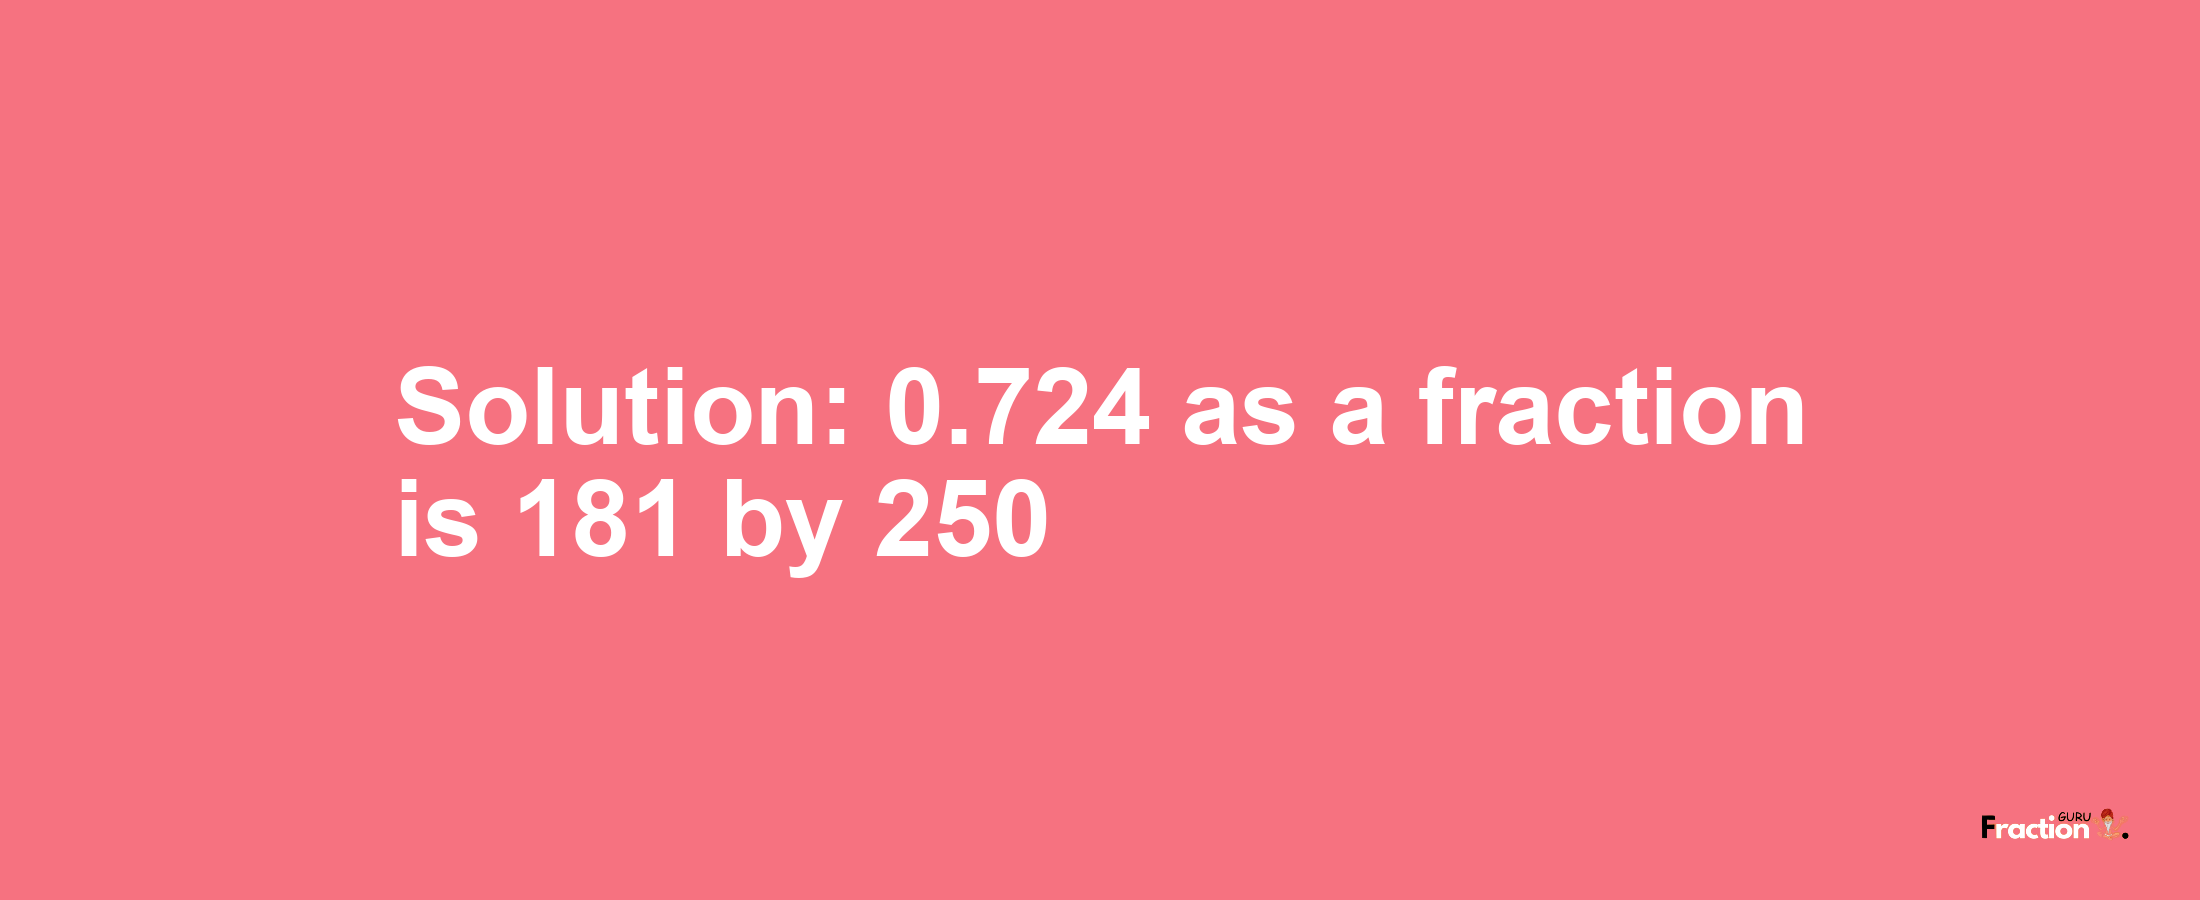 Solution:0.724 as a fraction is 181/250